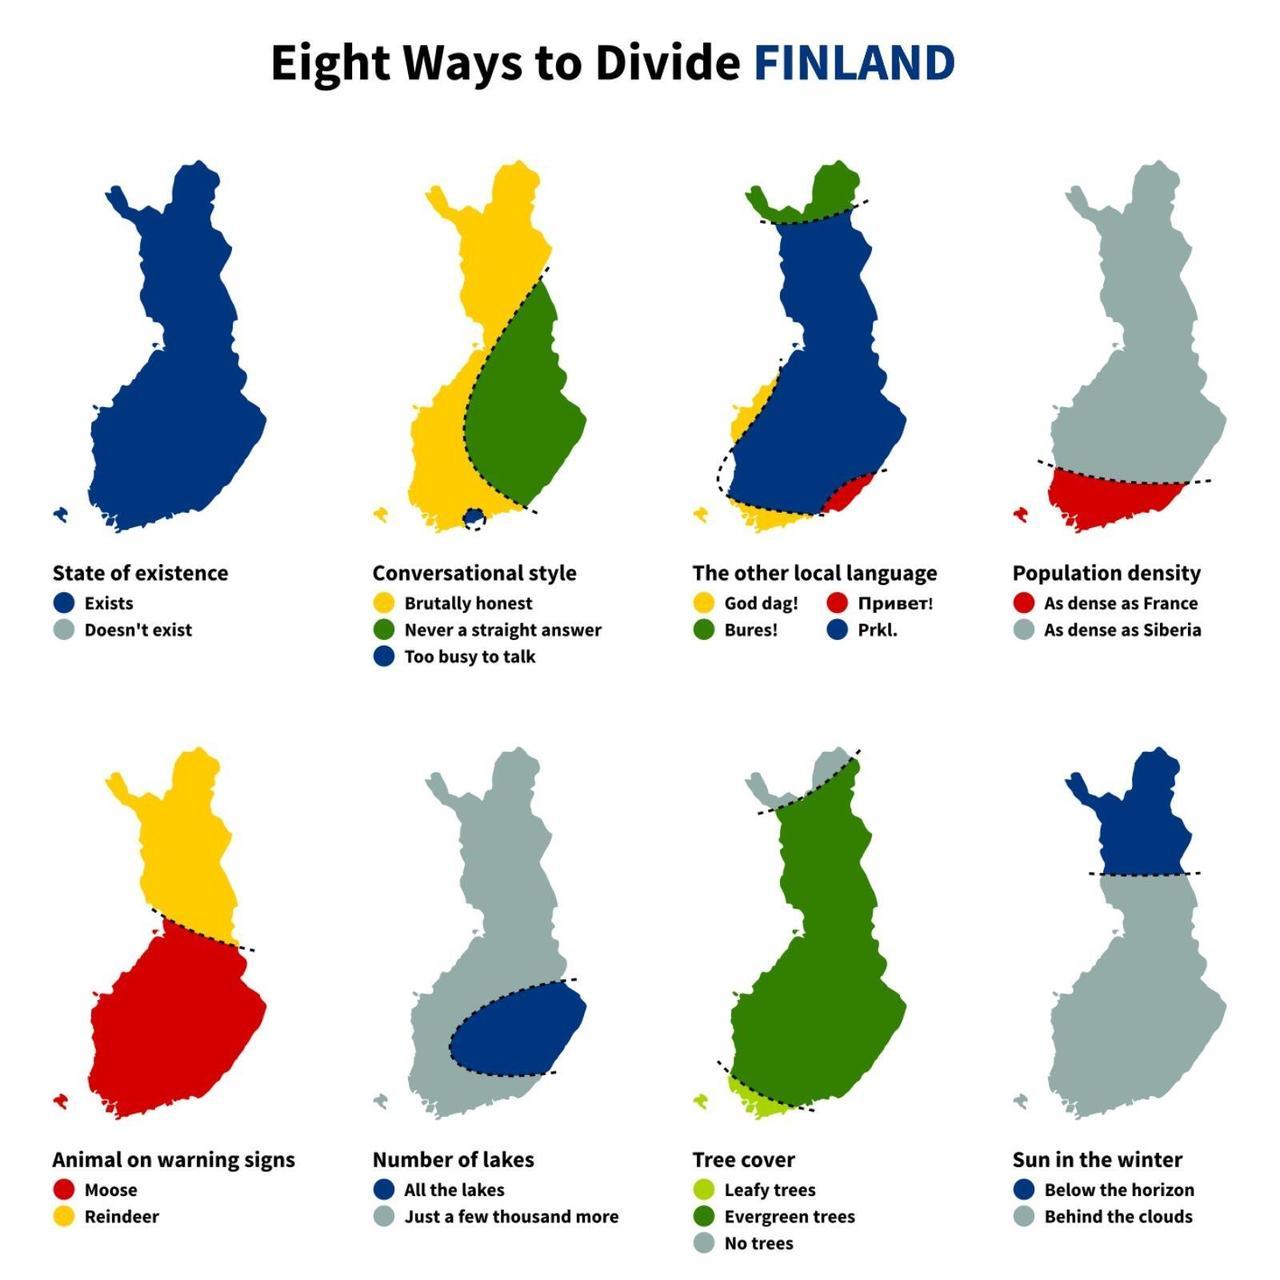 Eight ways to divide Finland.
by u/hezec